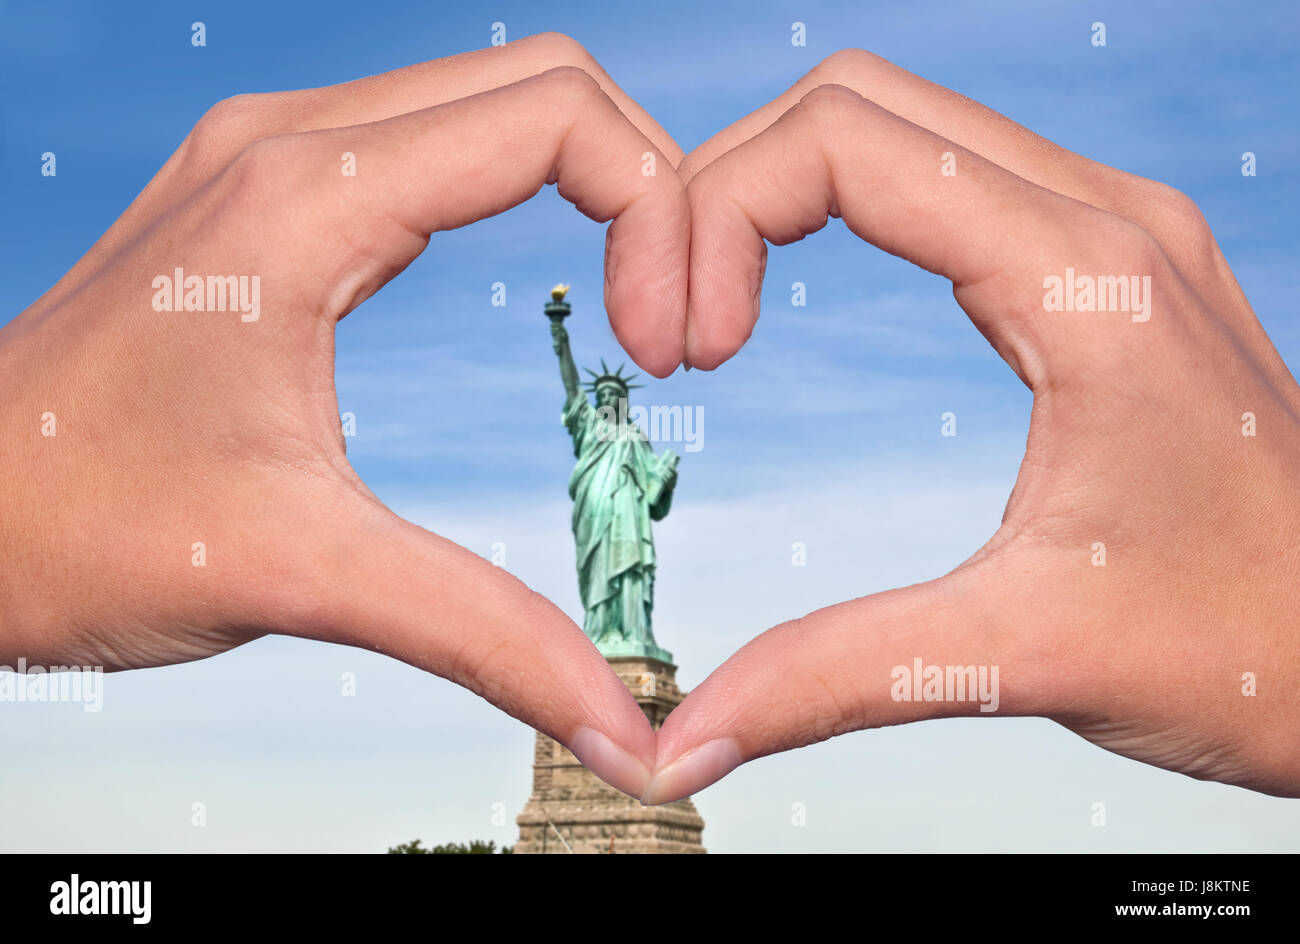 Statue of liberty and hands forming a heart, New York love and travel concept Stock Photo